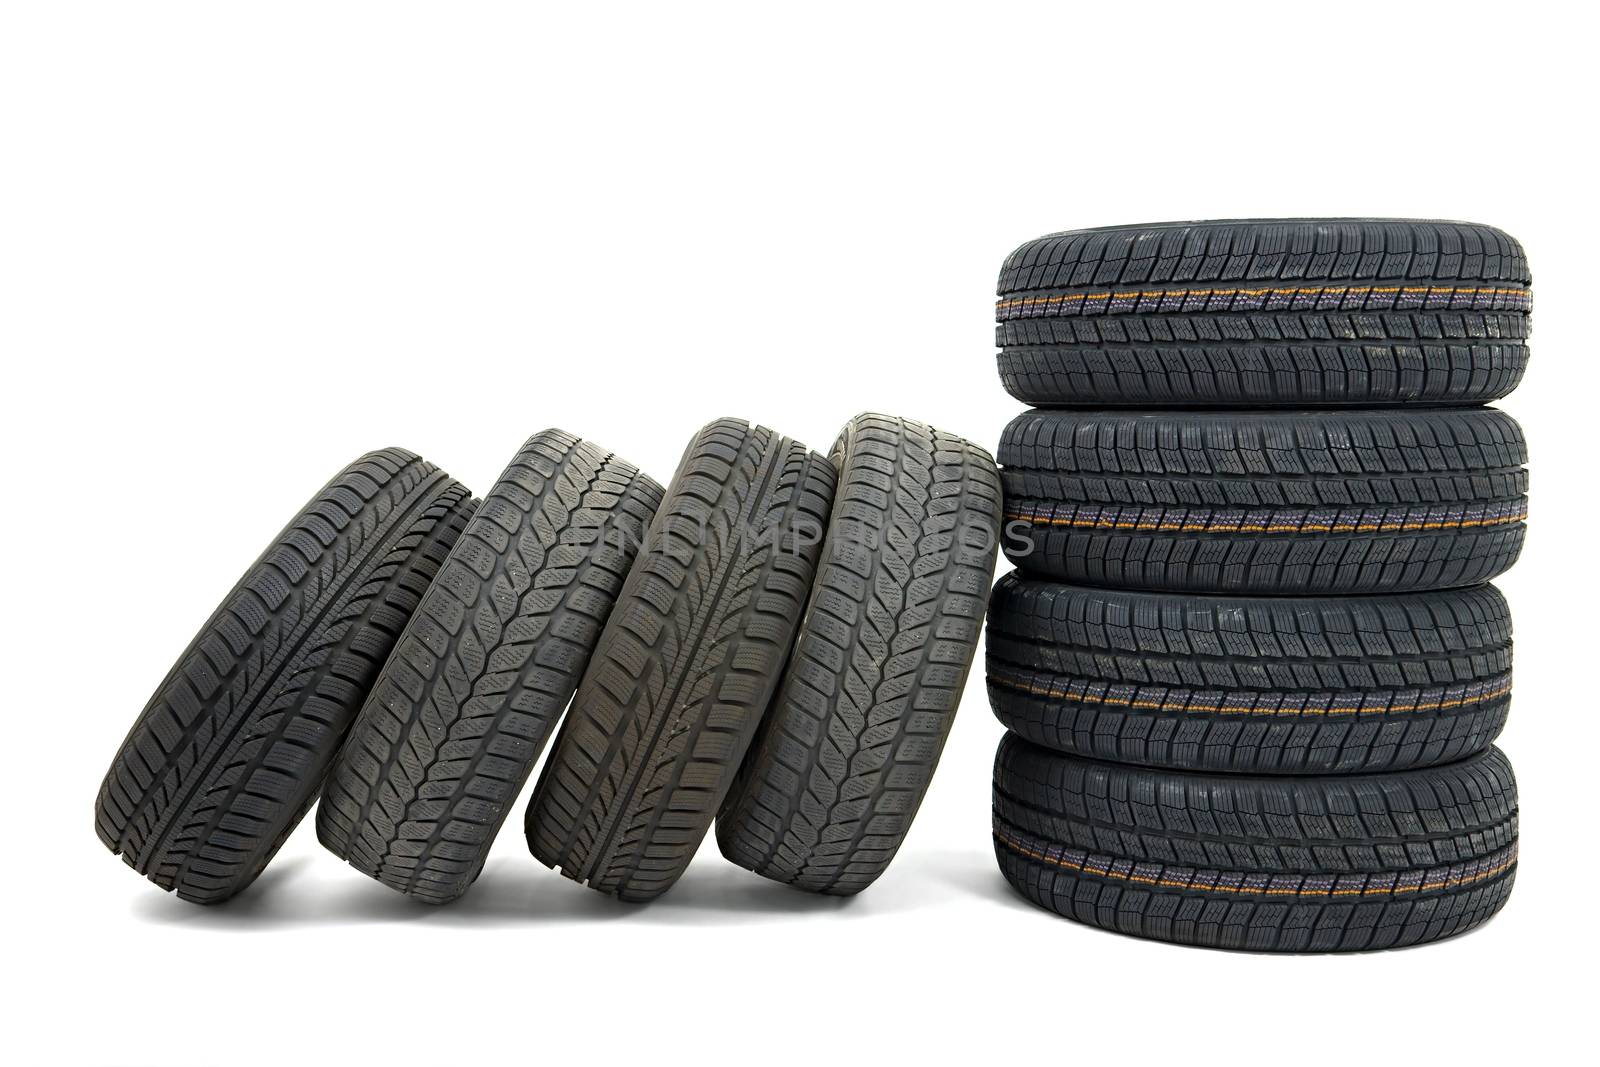 Many car tyres in a pile